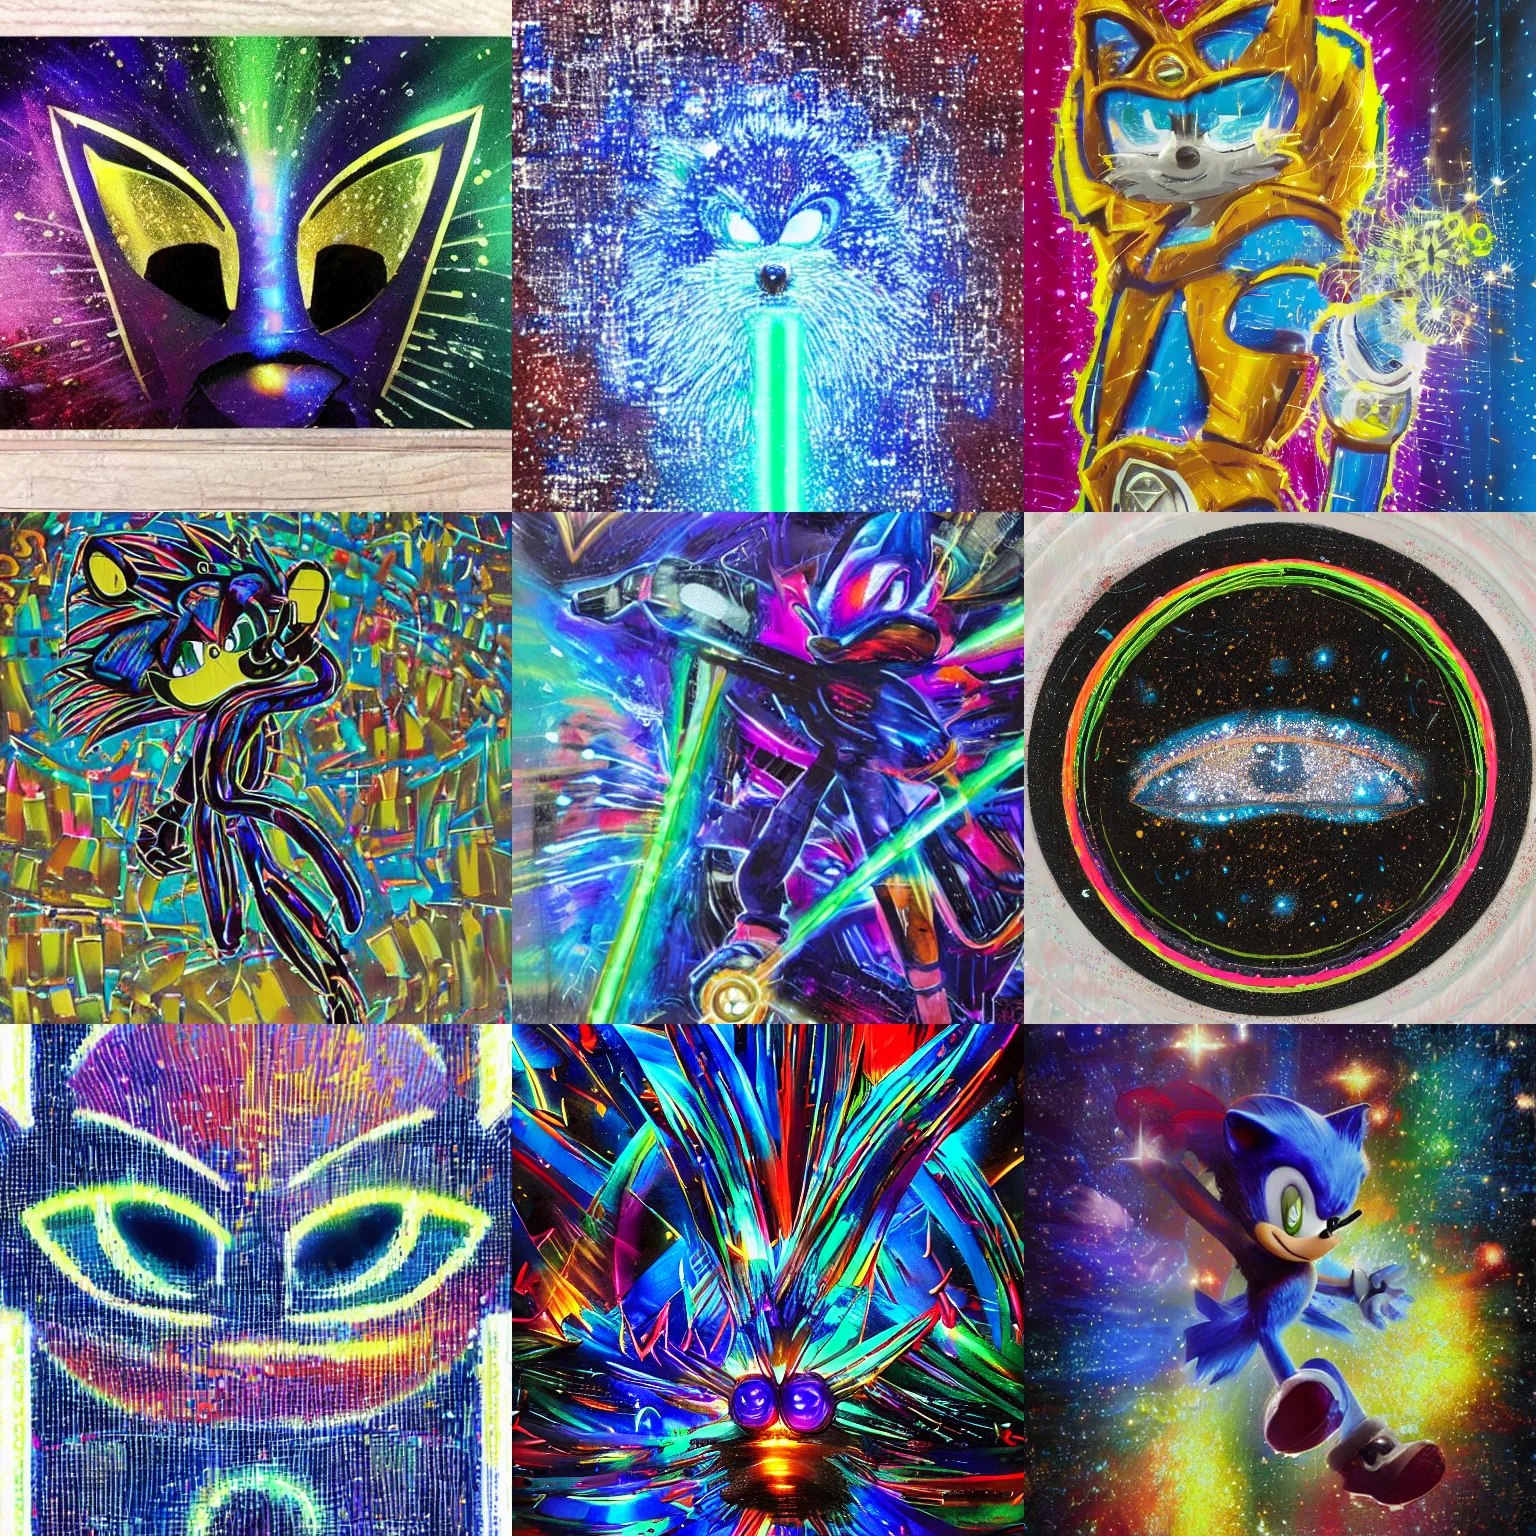 Prompt: sonic the hedgehog closeup portrait of Neon sonic the hedgehog 🌌 in metallic light trail light saber galaxies by Okuda San Miguel and kandinsky on a starry black canvas, sonic the hedgehog galaxy gas brushstrokes, metallic flecked paint, metallic flecks, glittering metal paint, sonic the hedgehog metallic paint, glossy flecks of iridescence, glow in the dark, Uv, blacklight, colorful, 8k, 4k, brush strokes, painting, highly detailed, iridescent brushed metal sonic the hedgehog